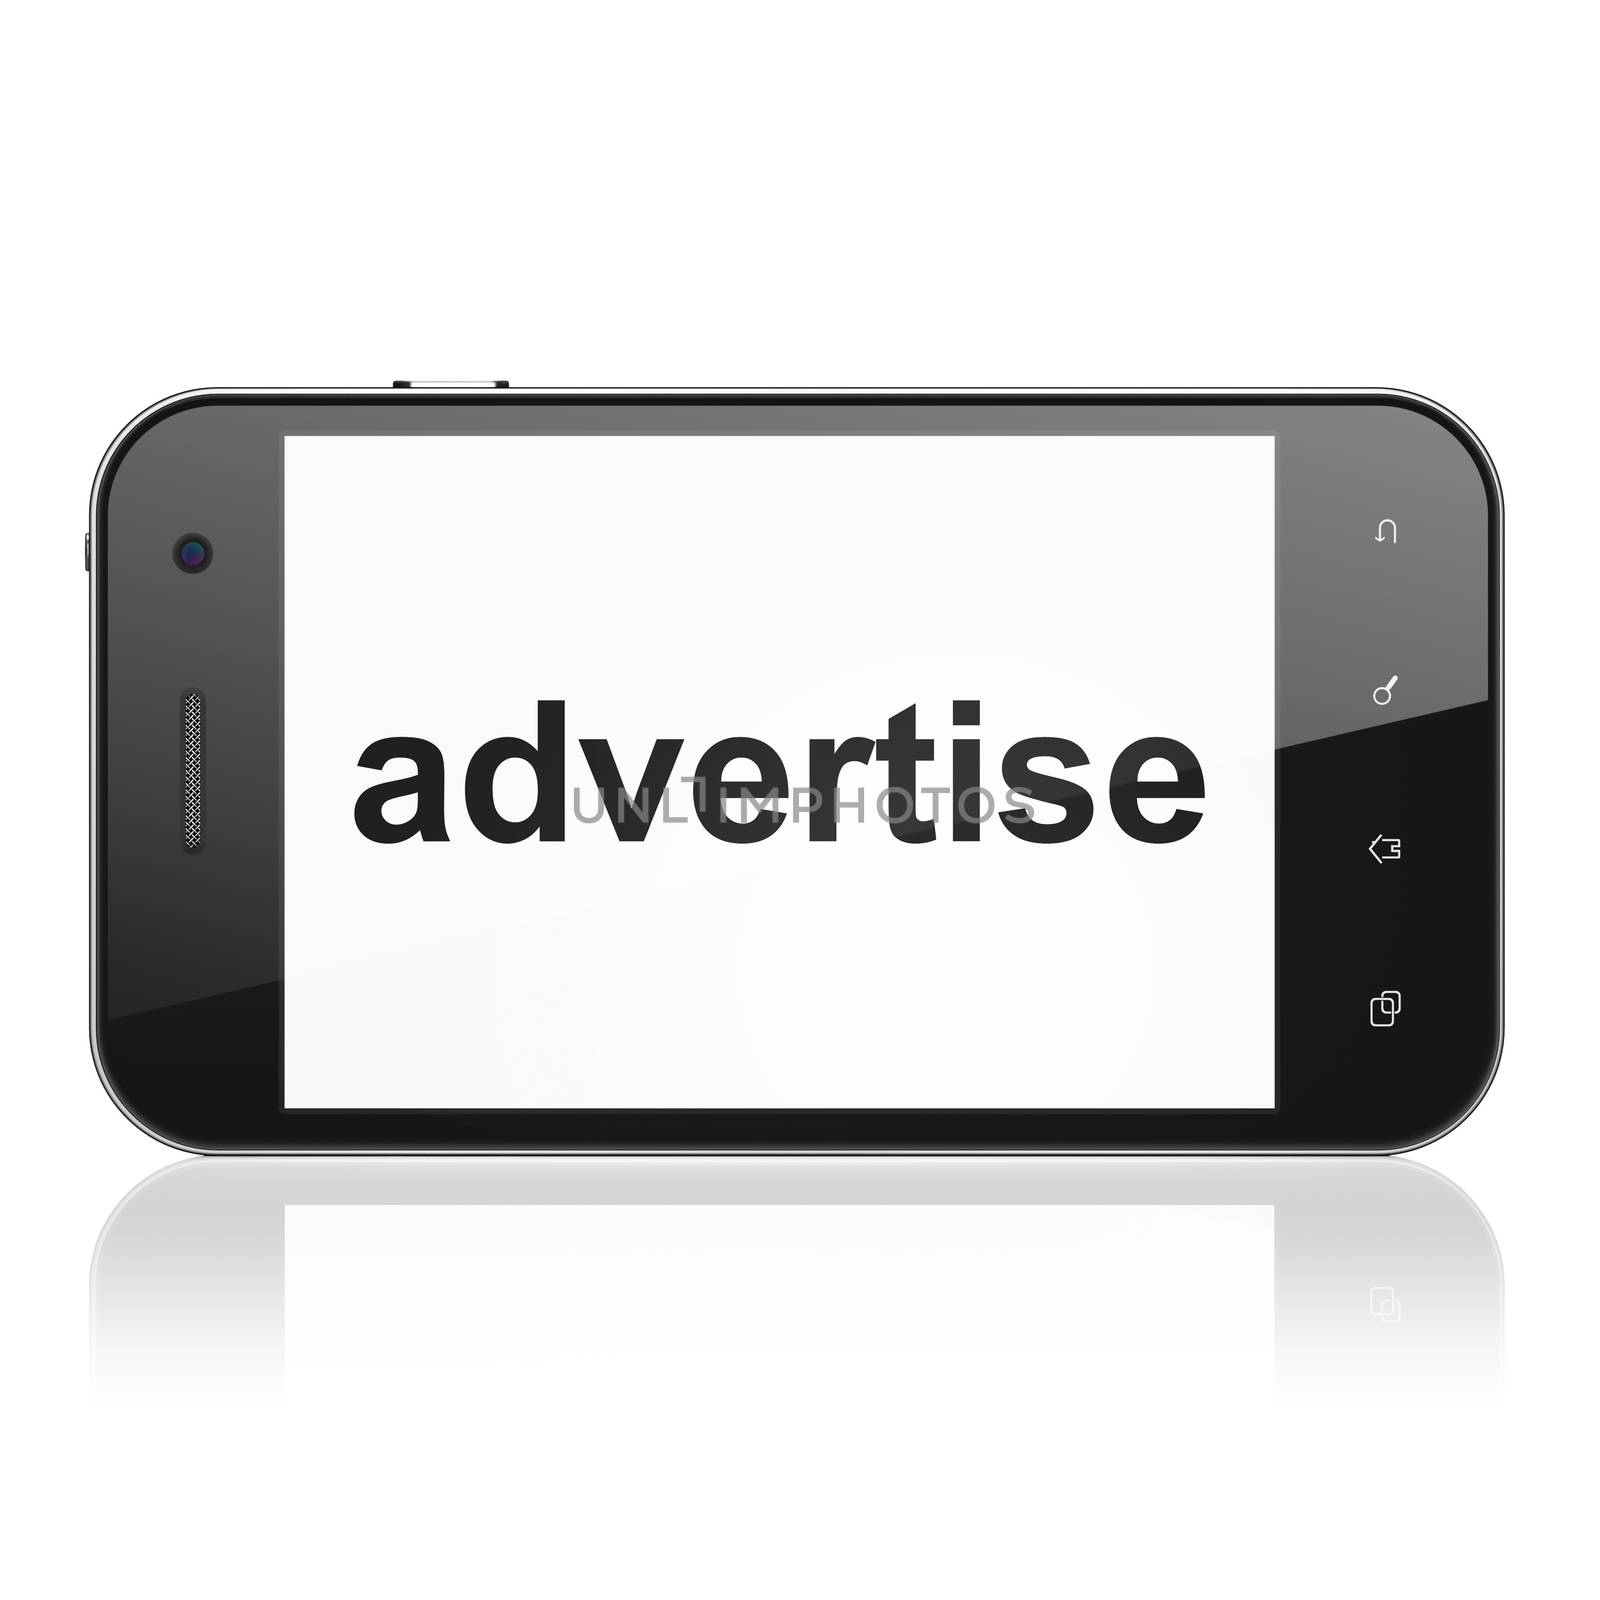 Marketing concept: smartphone with text Advertise on display. Mobile smart phone on White background, cell phone 3d render